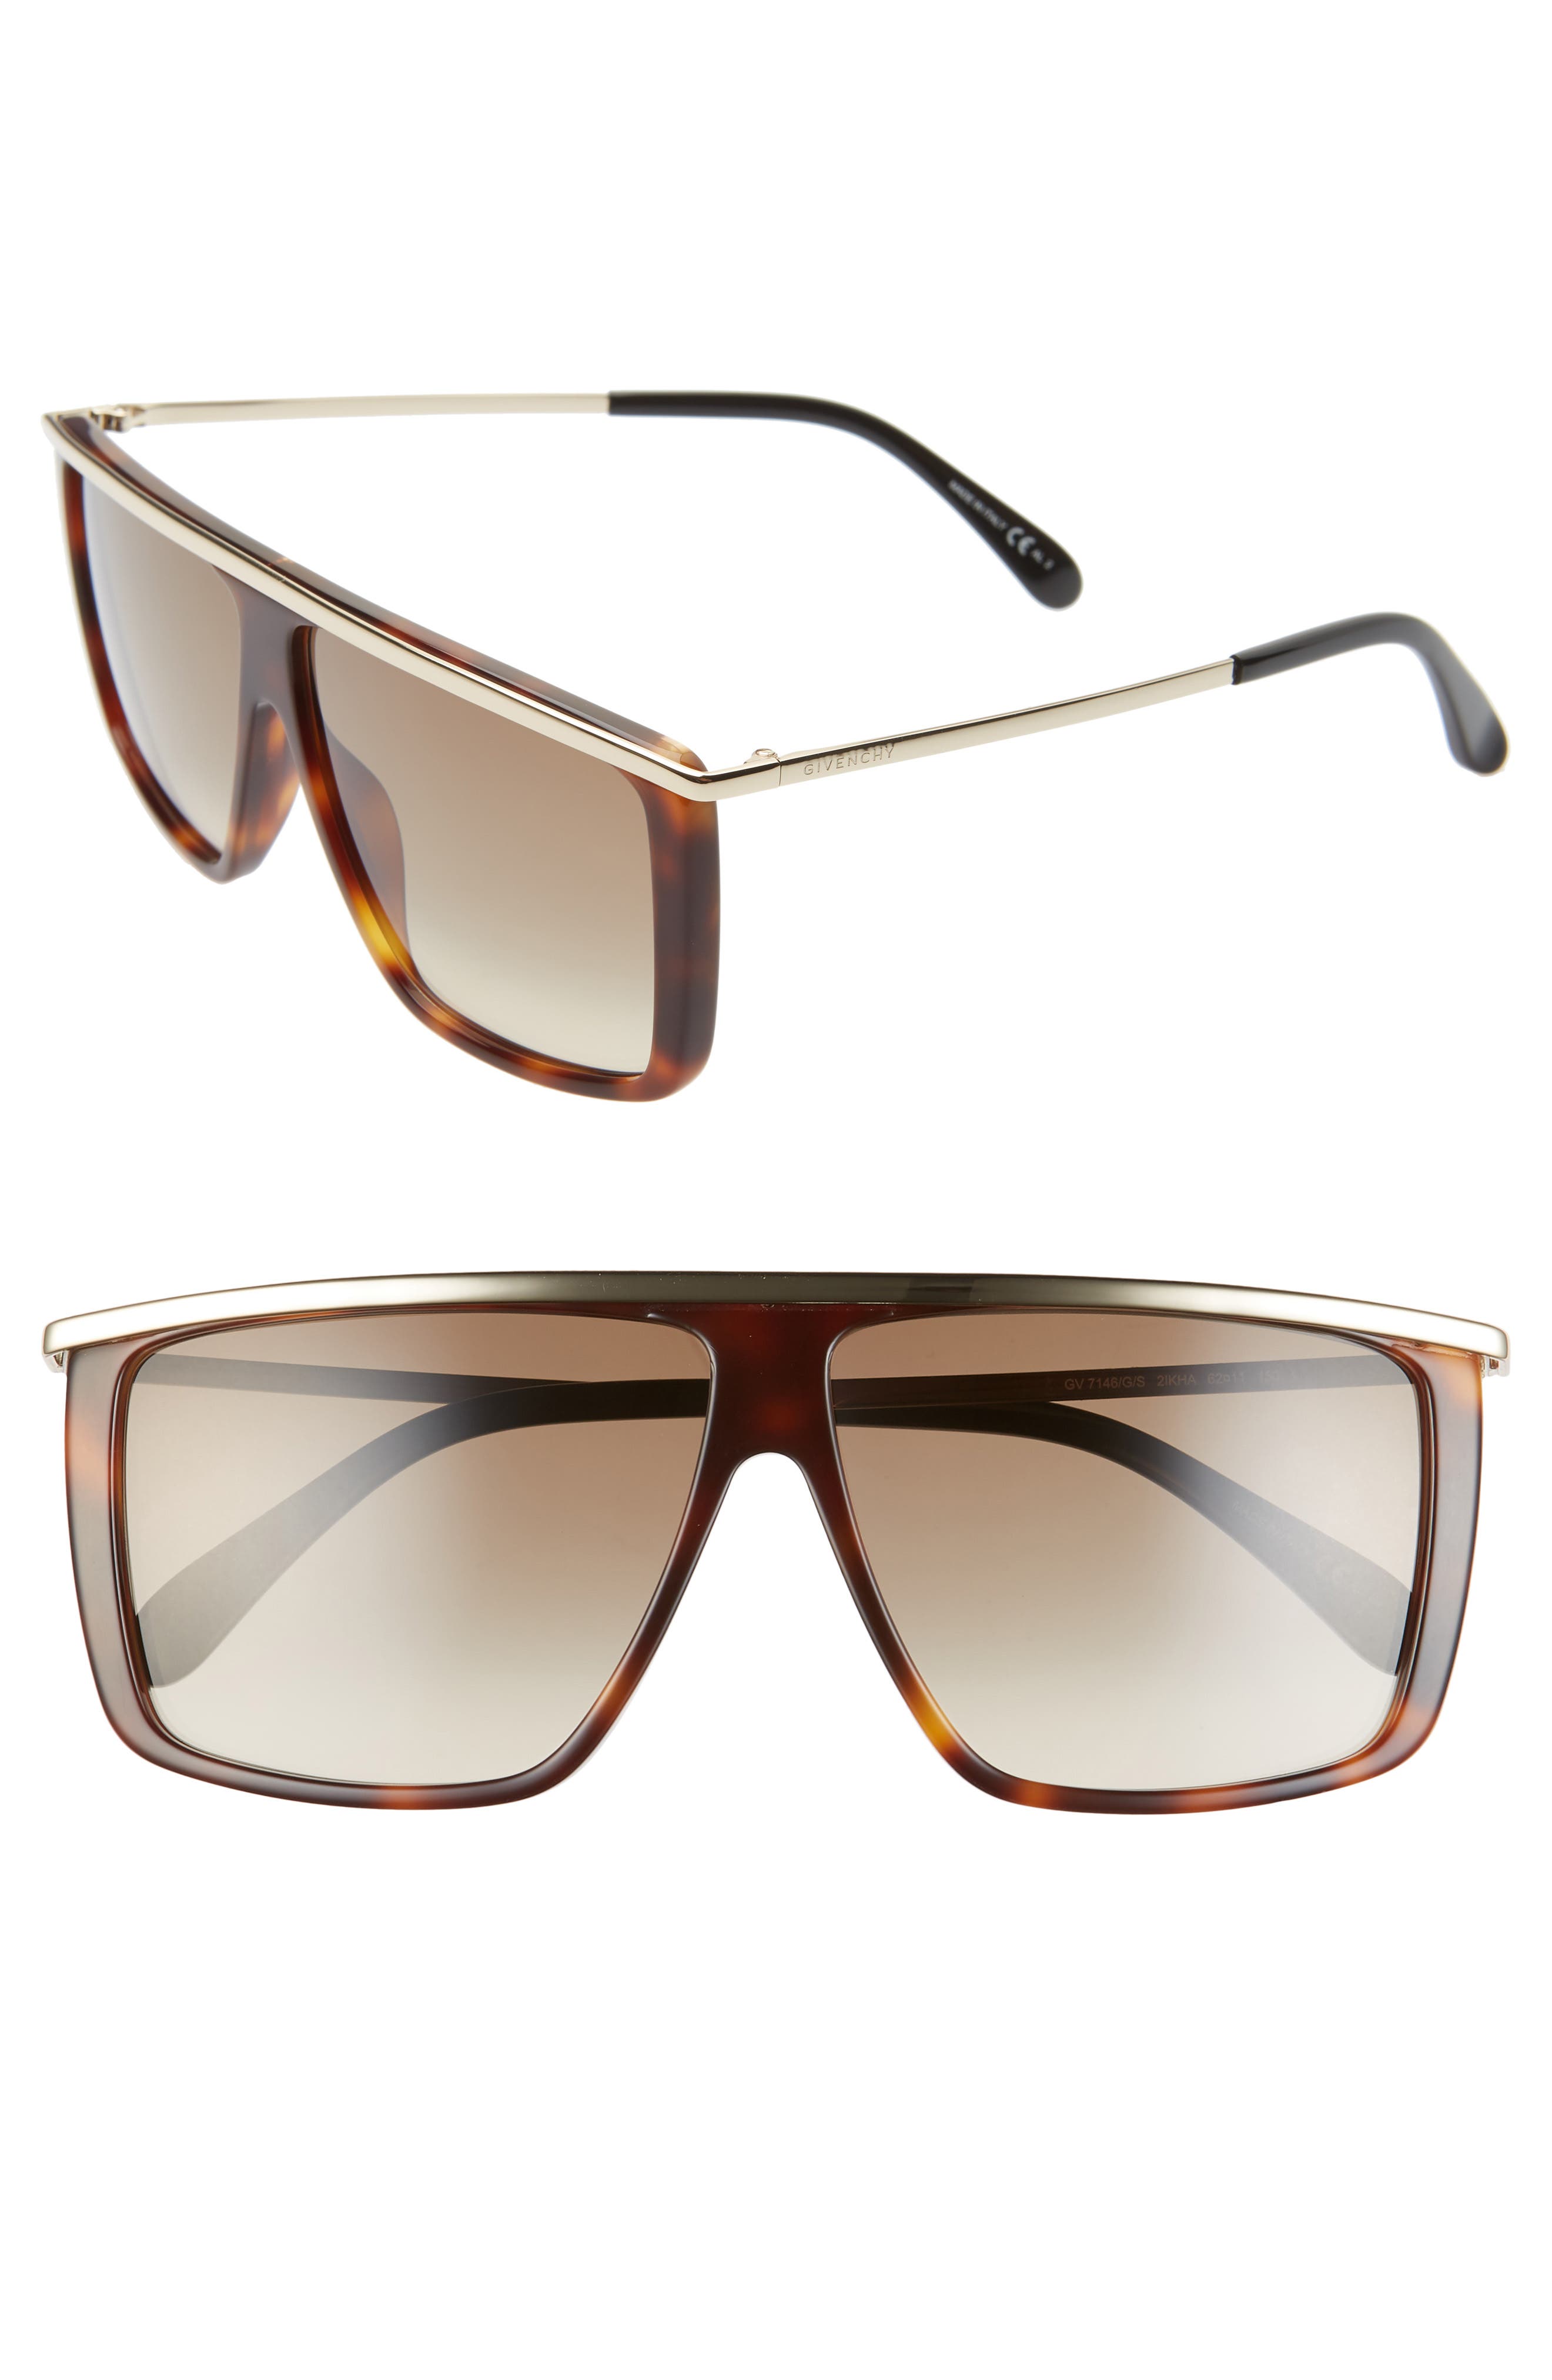 givenchy sunglasses nordstrom